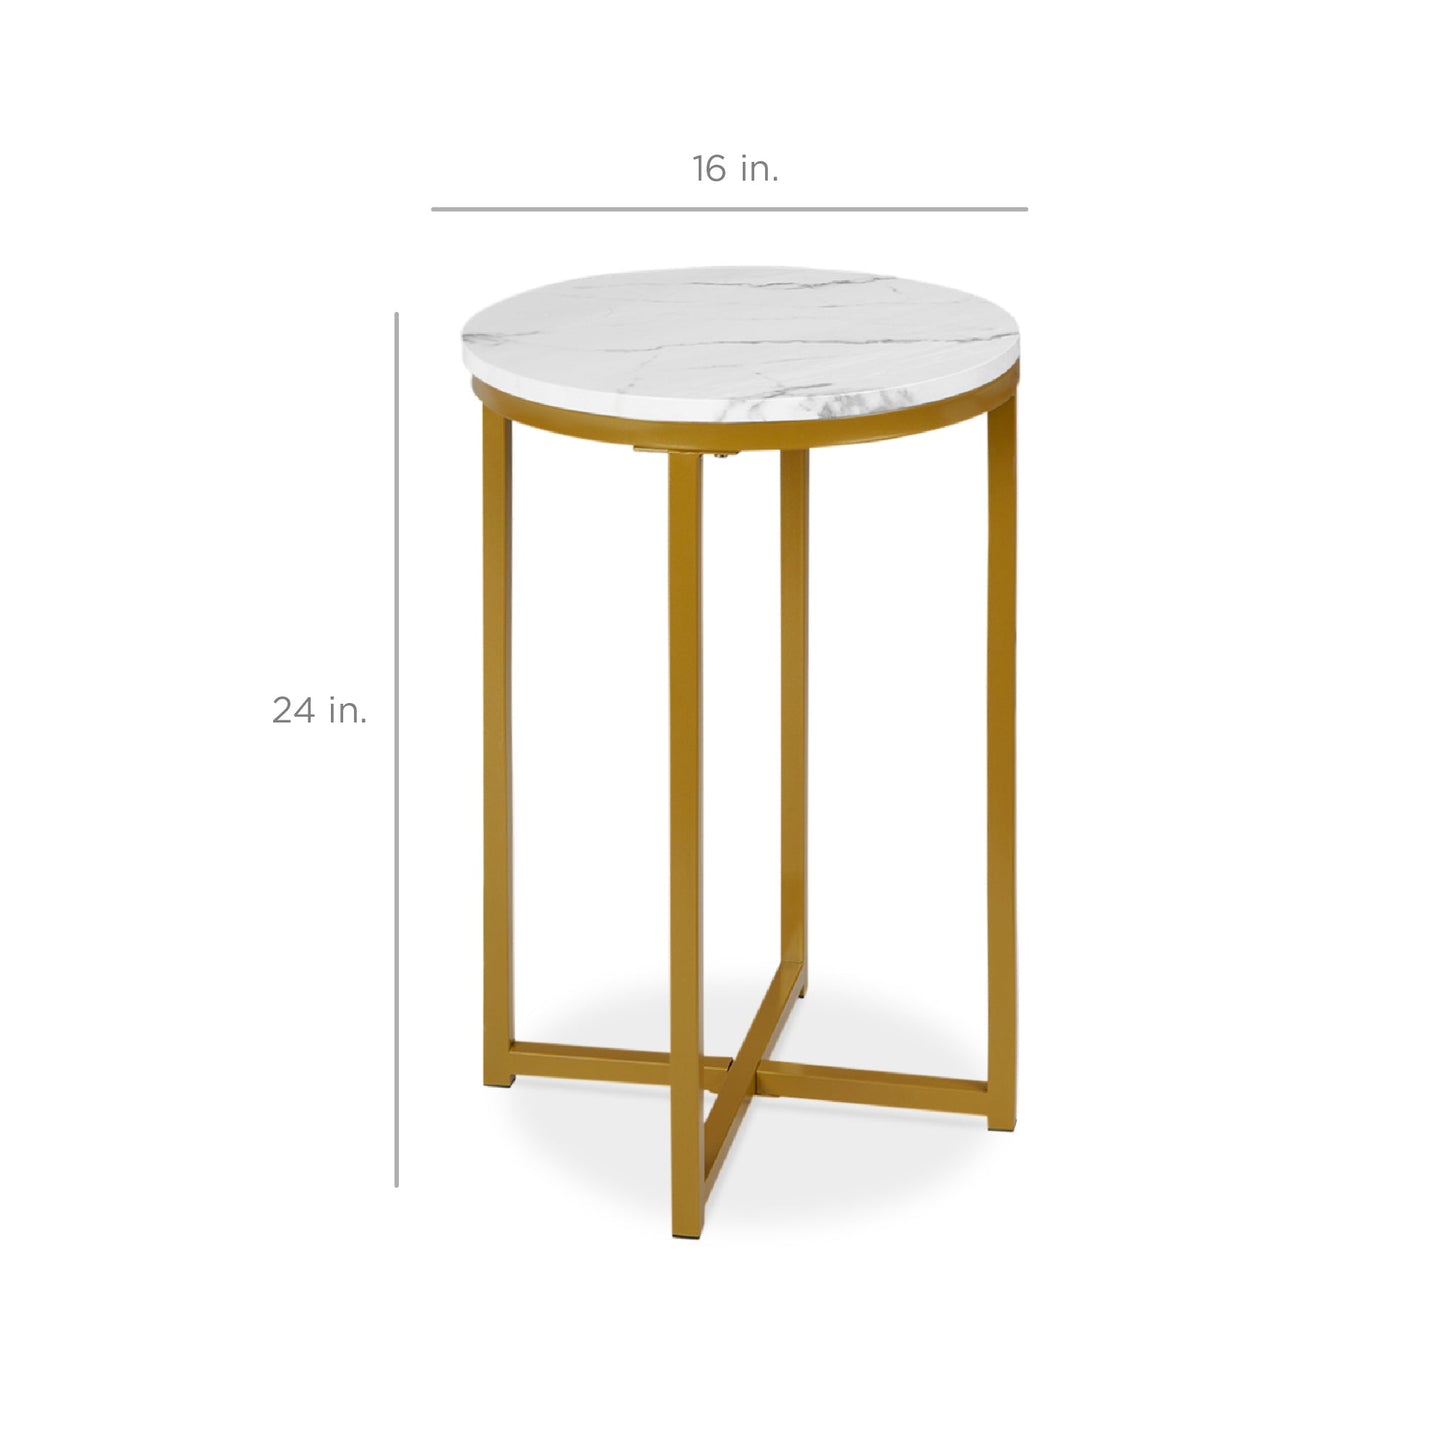 Round Coffee Side Table w/ Faux Marble Top, Metal Frame - 16in